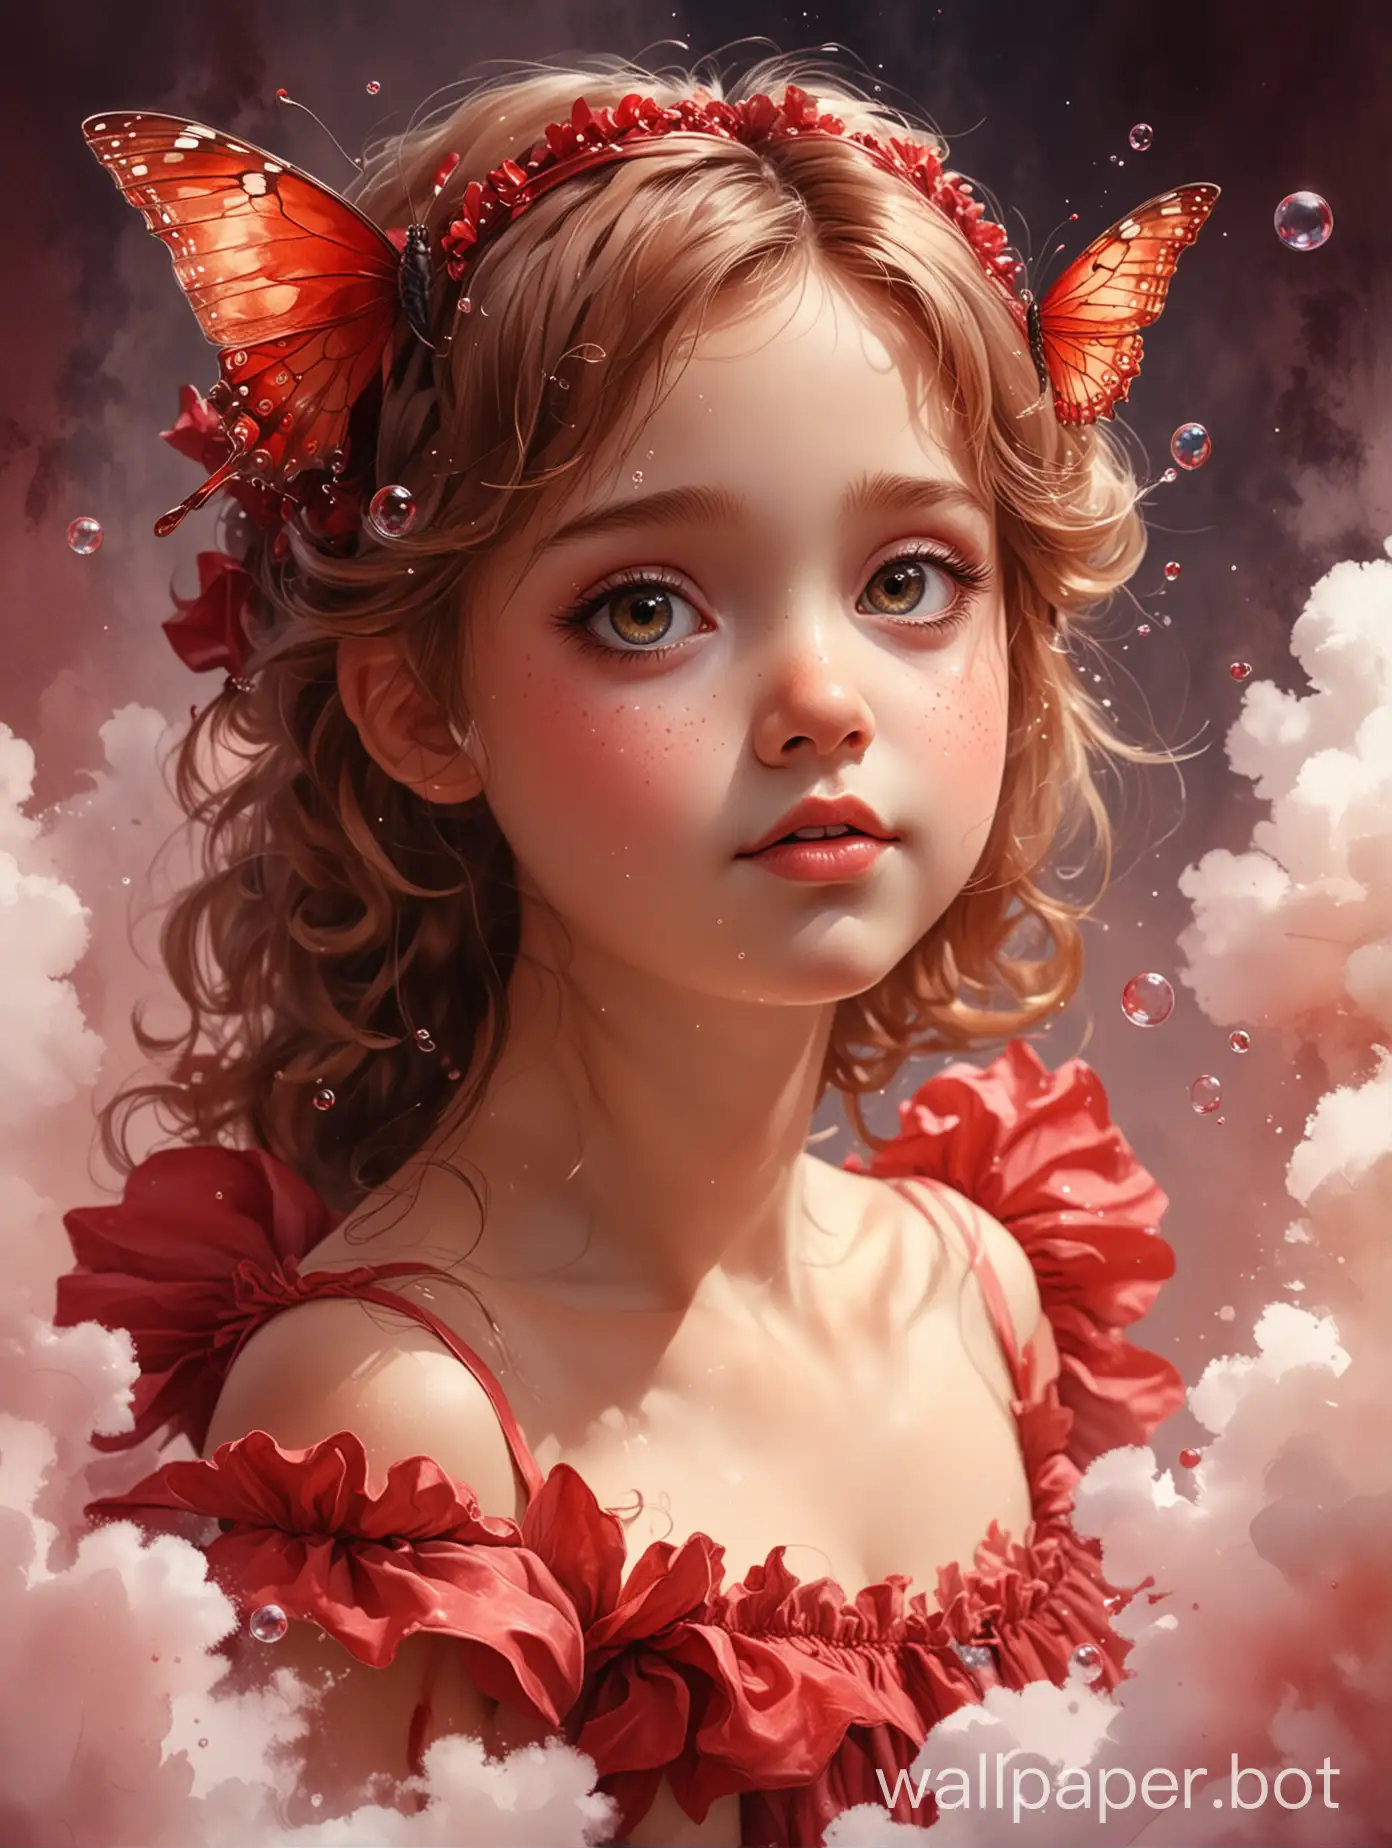 Soap bubbles, cotton clouds, on watercolor shades of crimson, burgundy and other reds| half body|lovely young princess butterfly fairy looking at me with big (light brown highly detailed eyes), shadow play| dynamic pose, as if flying towards me, bottom view| fairy tale, a beautiful fantasy loved by children and adults, ultra-high detail, high quality, Artstation, perfect centered composition, watercolor ink.